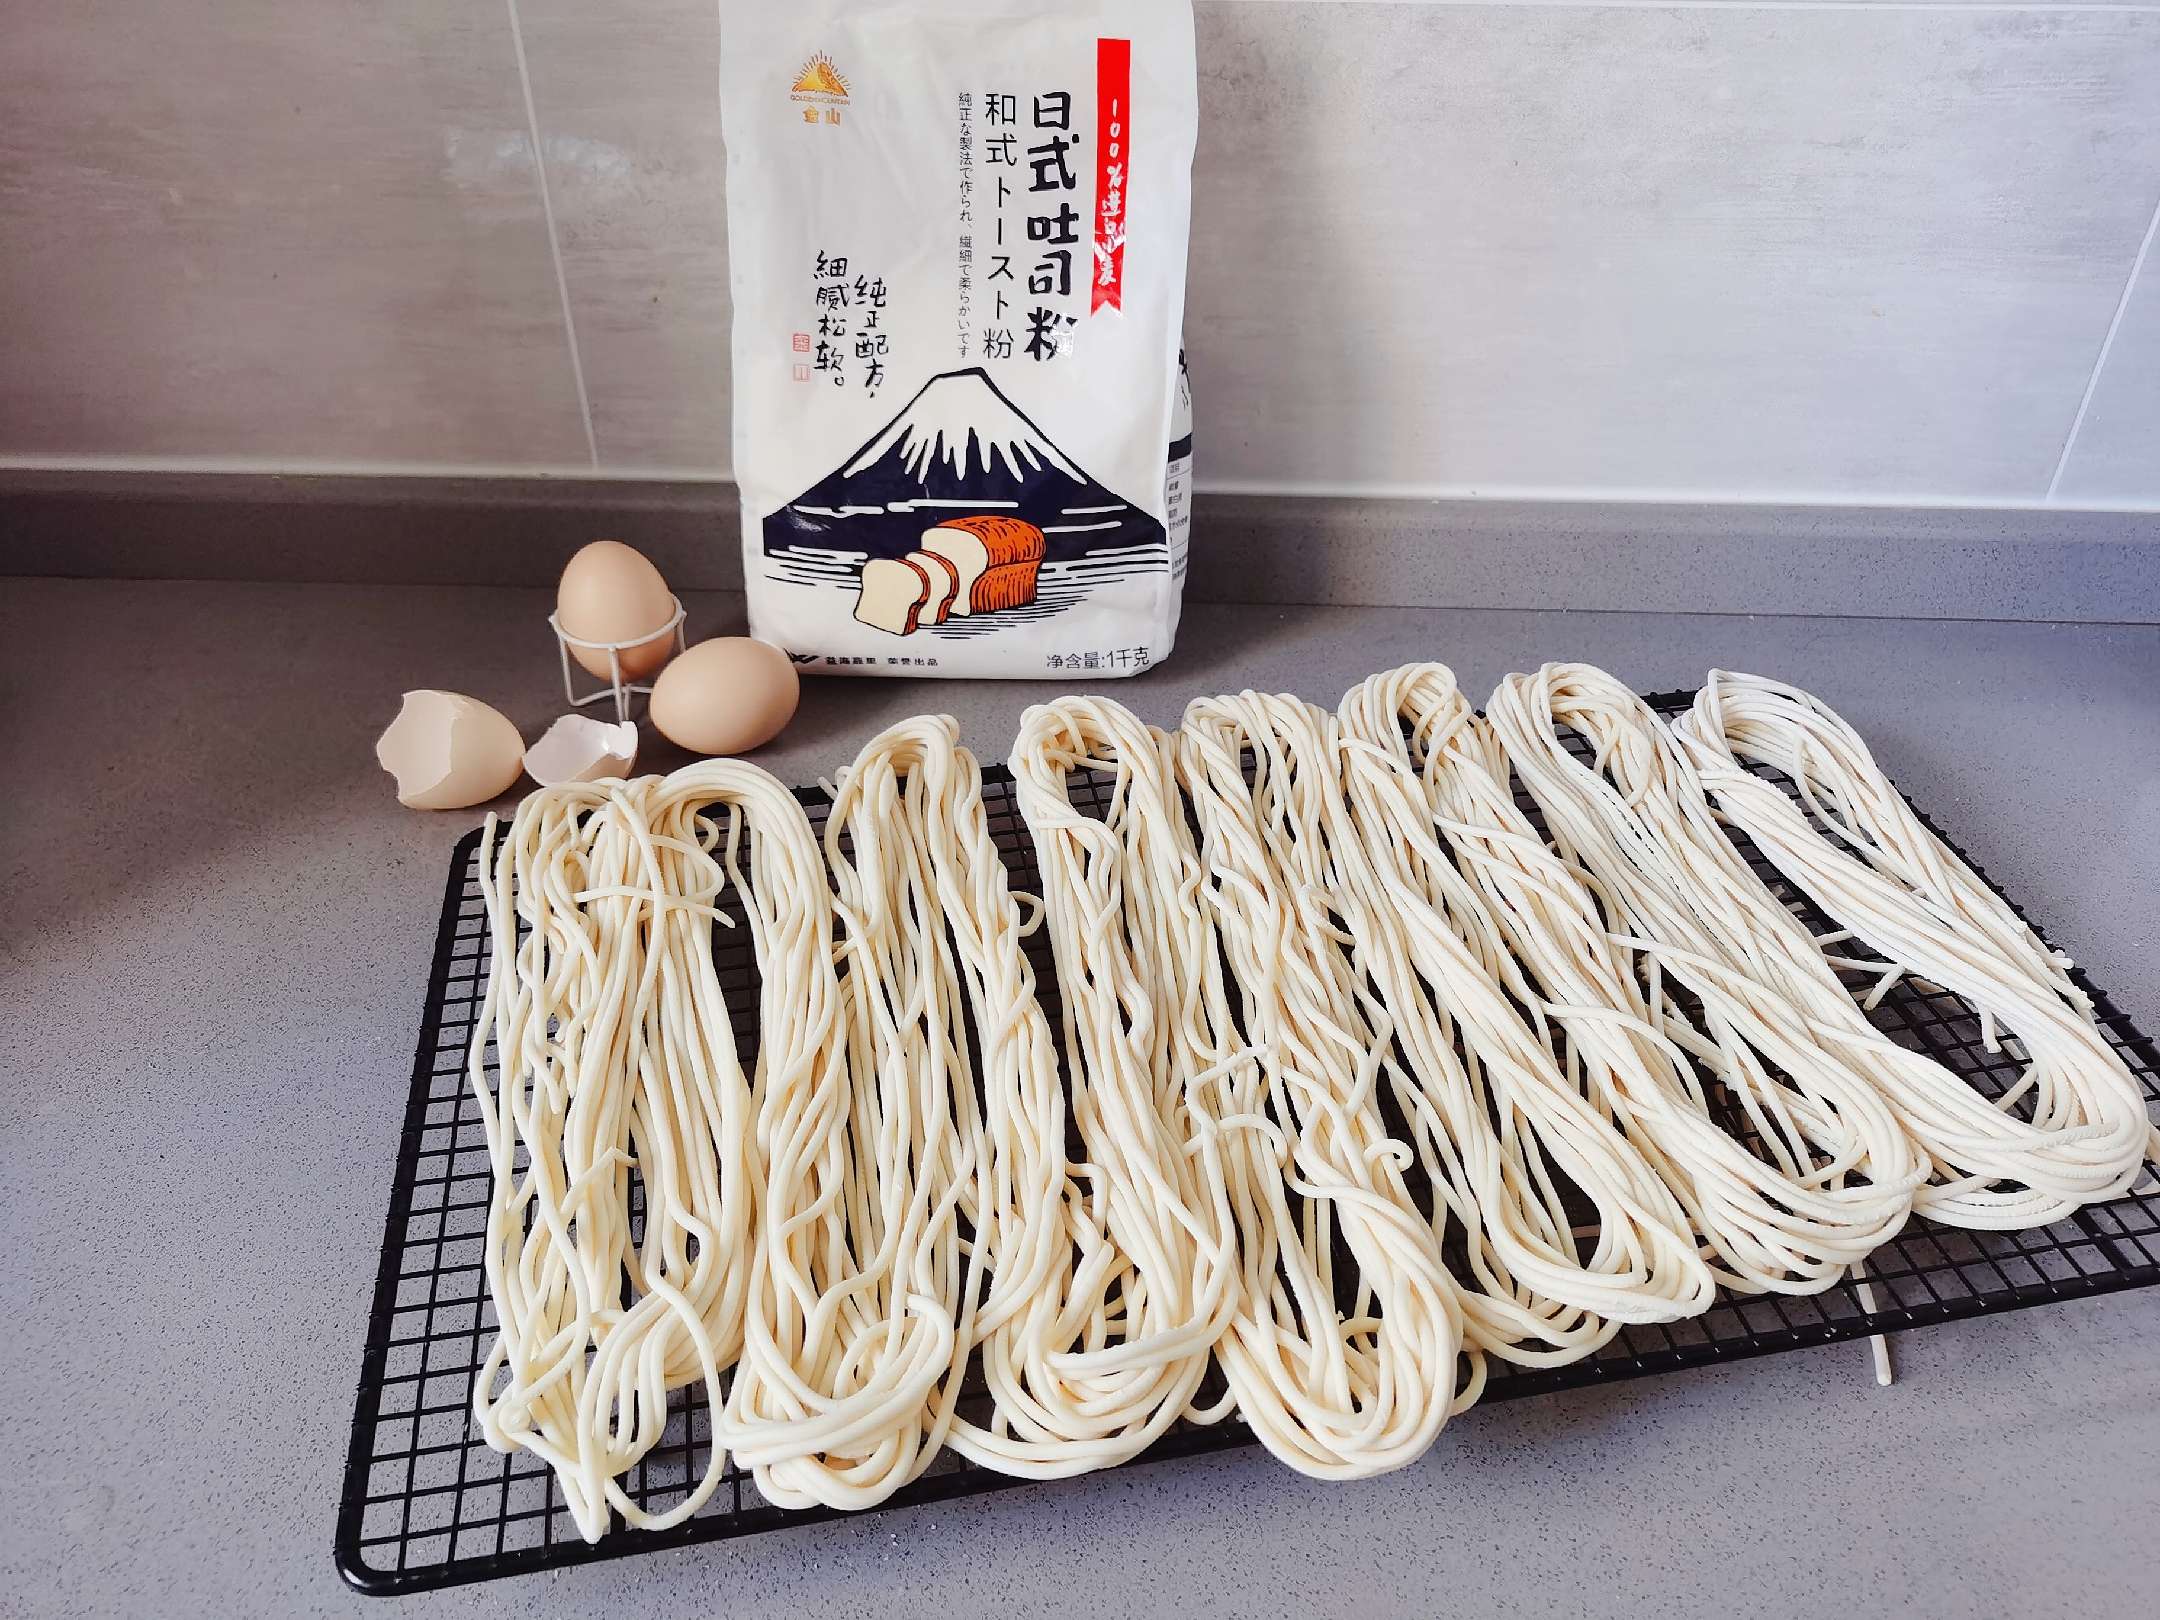 Homemade Noodles with Eggs, The Roots are Firm and Smooth recipe